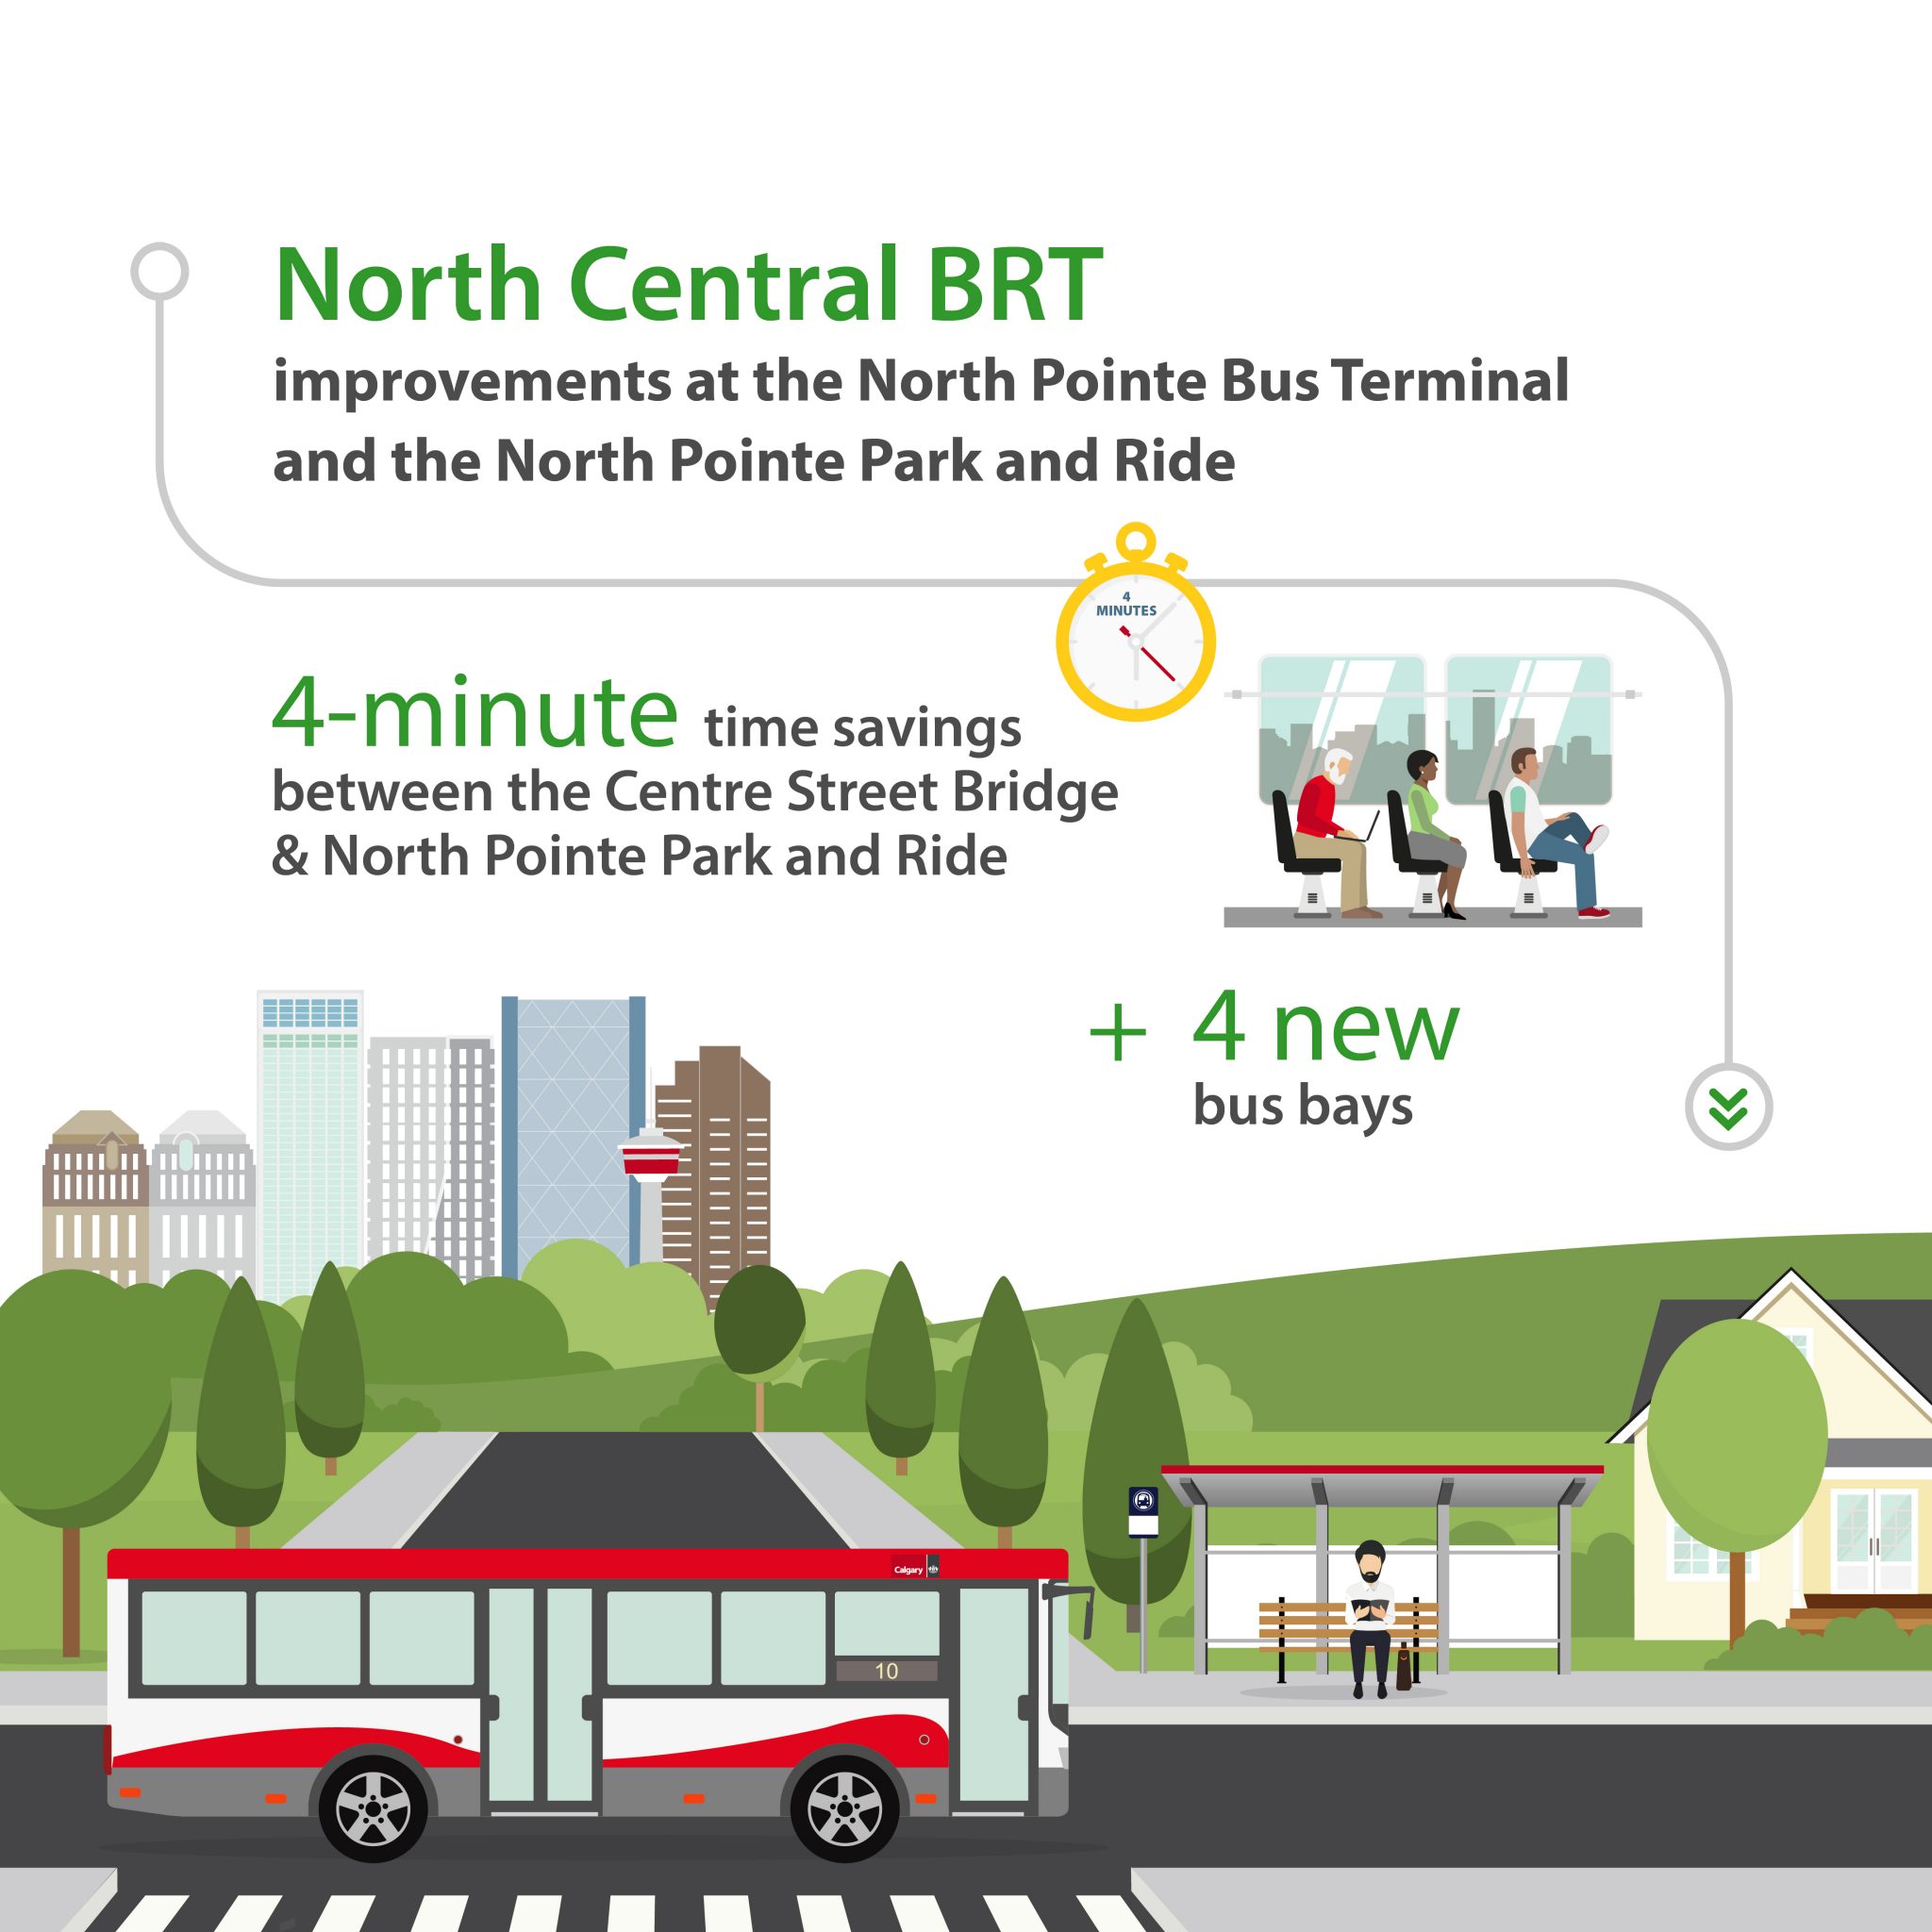 North Central BRT improvements at the North Pointe Bus Terminal and the North Pointe Park and Ride will have 4-minute time savings between the Centre Street Bridge and North Pointe Park and Ride plus 4 new bus bays.